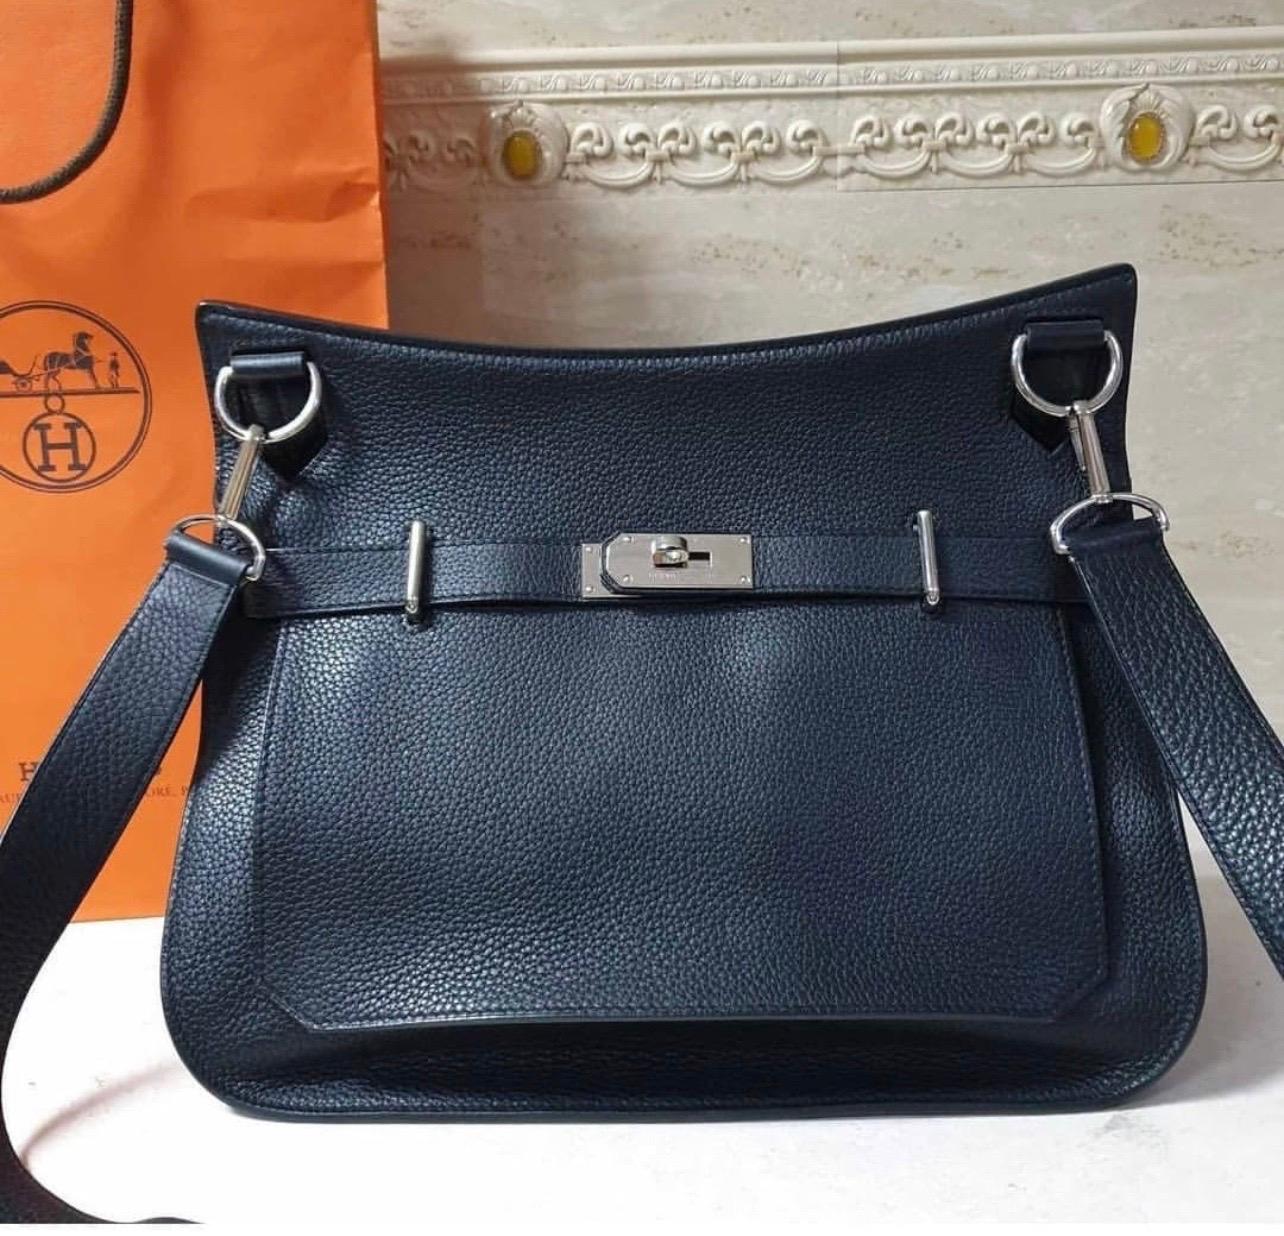 Model: Jypsière
Color: Black

Hardware: Palladium plated

34 x 26 x 15 cm

Condition is very good. 

For buyers from EU we can provide shipping from Poland. Please demand if you need.